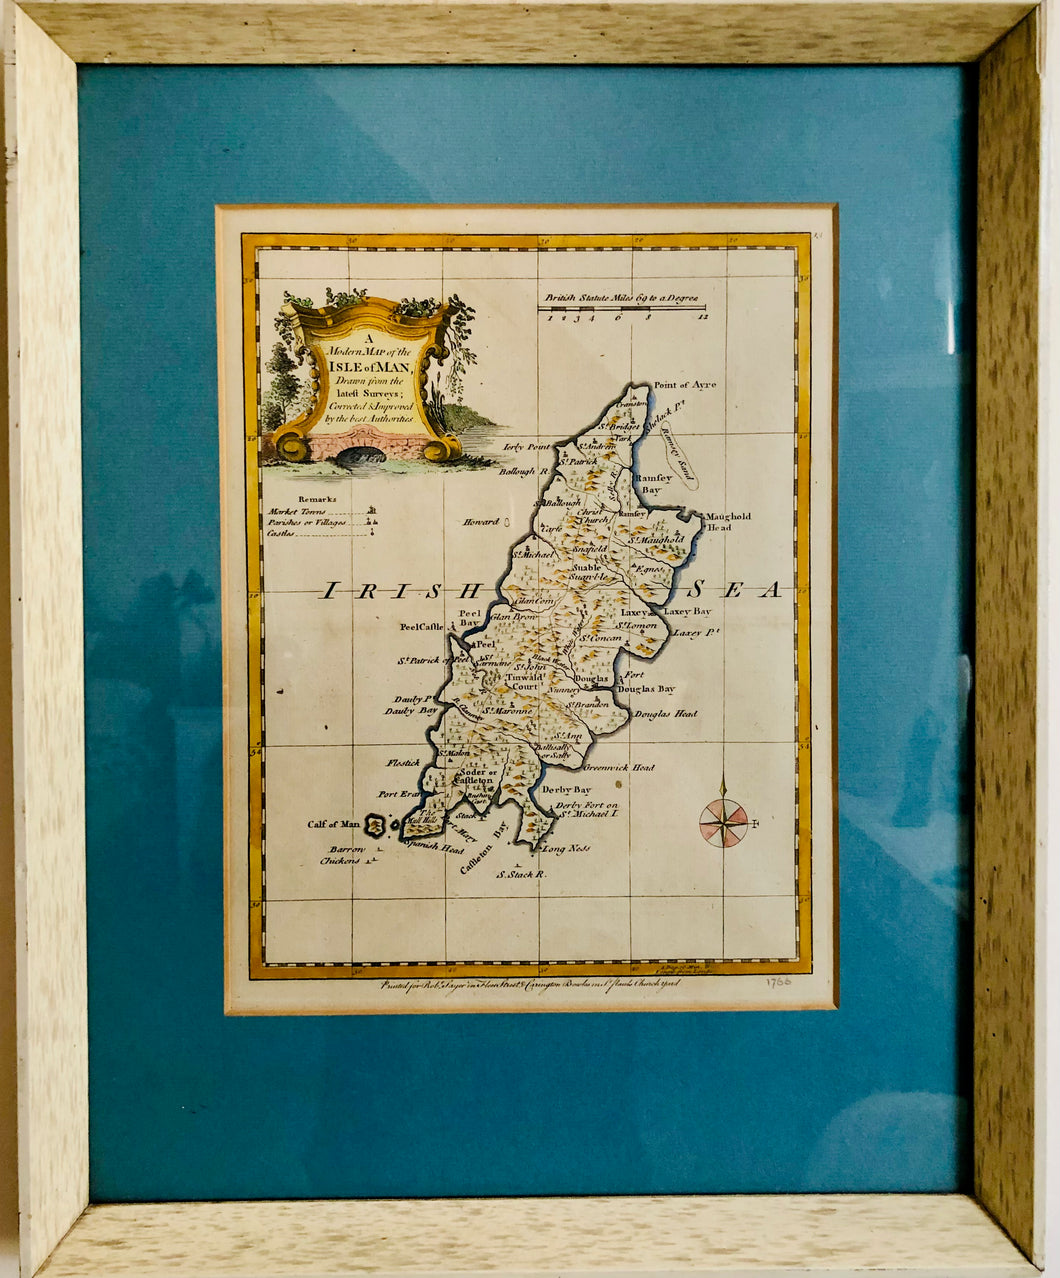 Antique Coloured Map of Isle of Man, framed and glazed, 1766